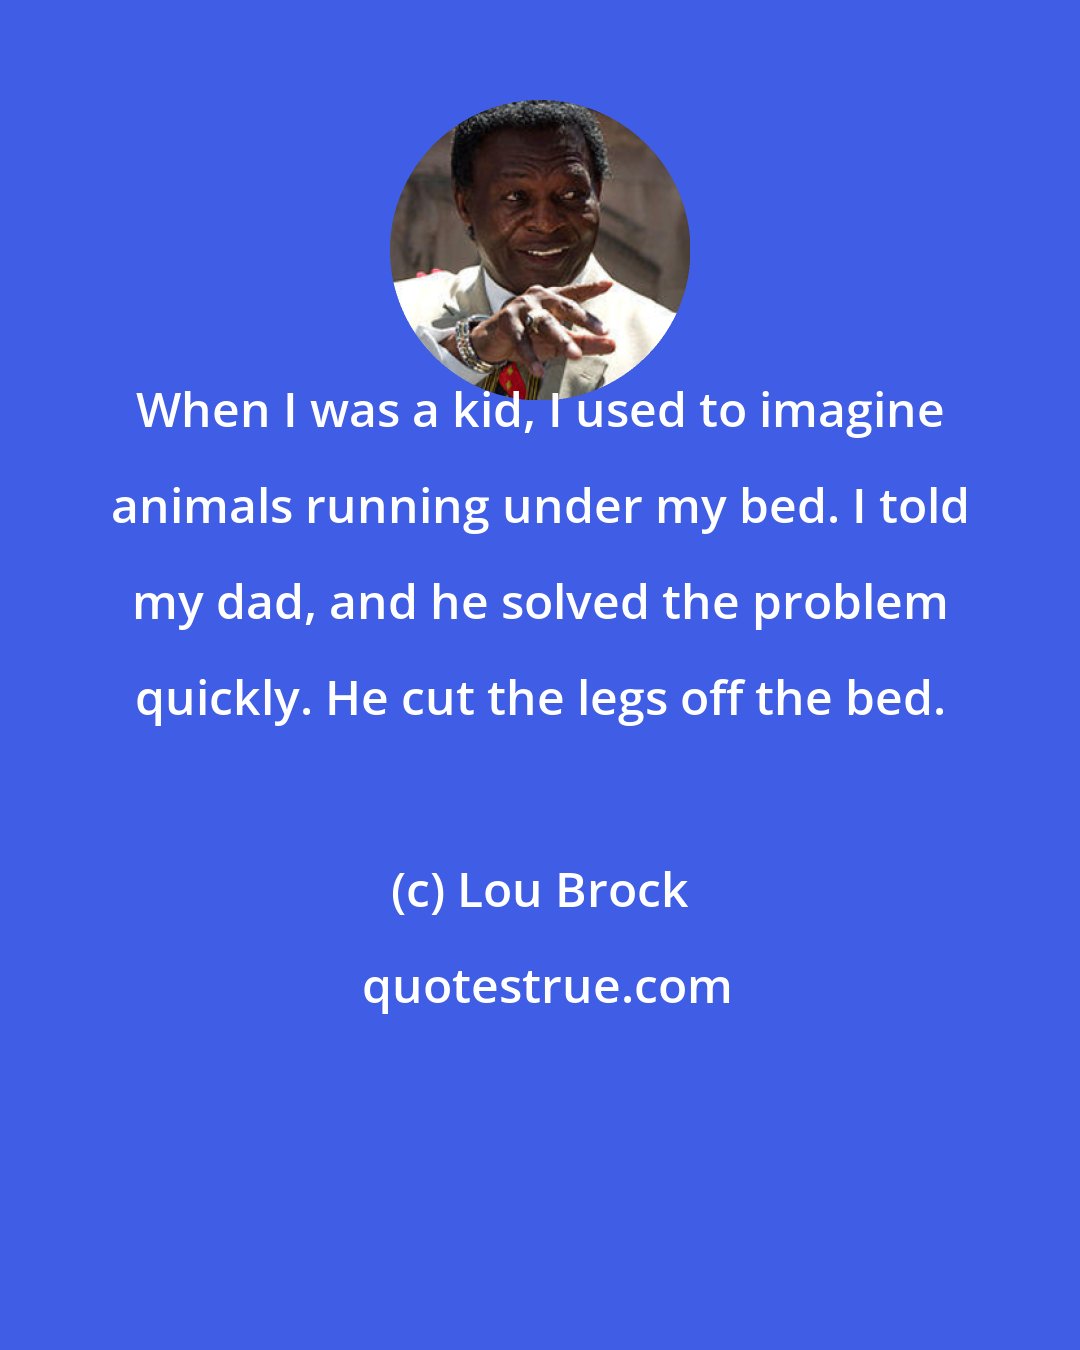 Lou Brock: When I was a kid, I used to imagine animals running under my bed. I told my dad, and he solved the problem quickly. He cut the legs off the bed.